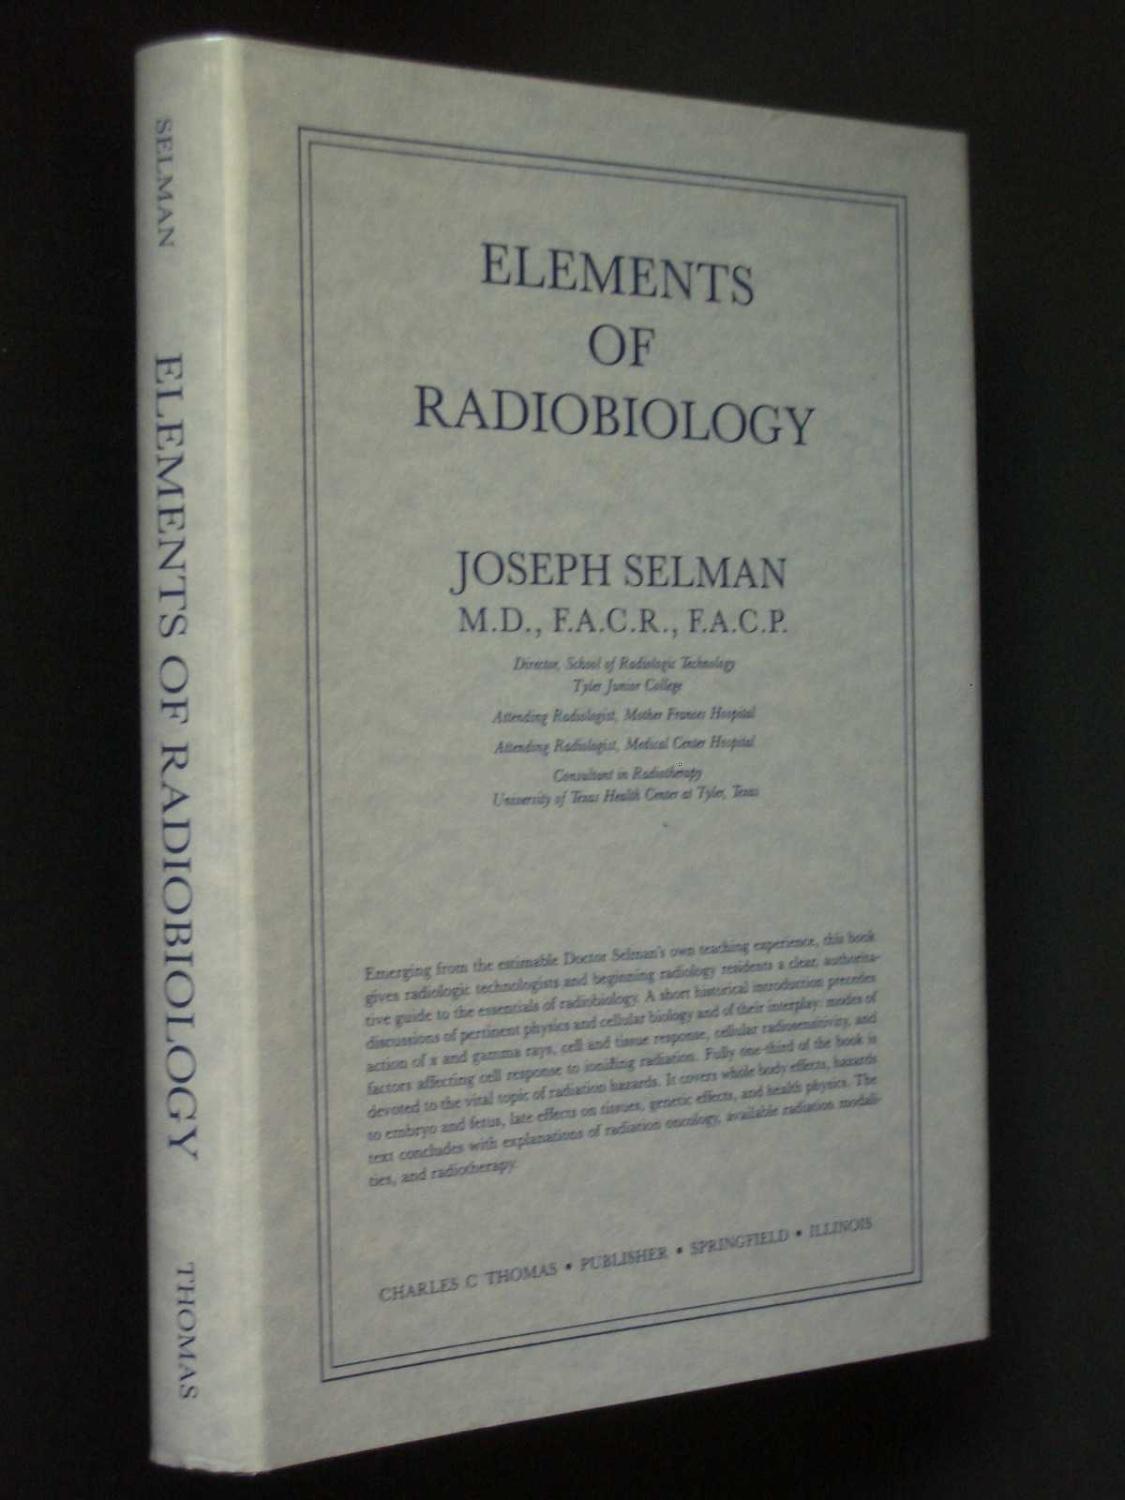 Radiobiology　Selman,　Hard　Cover　(1983)　First　[MWABA,　Edition.　by　IOBA]　Elements　Good　Very　of　Joseph;　Bookworks